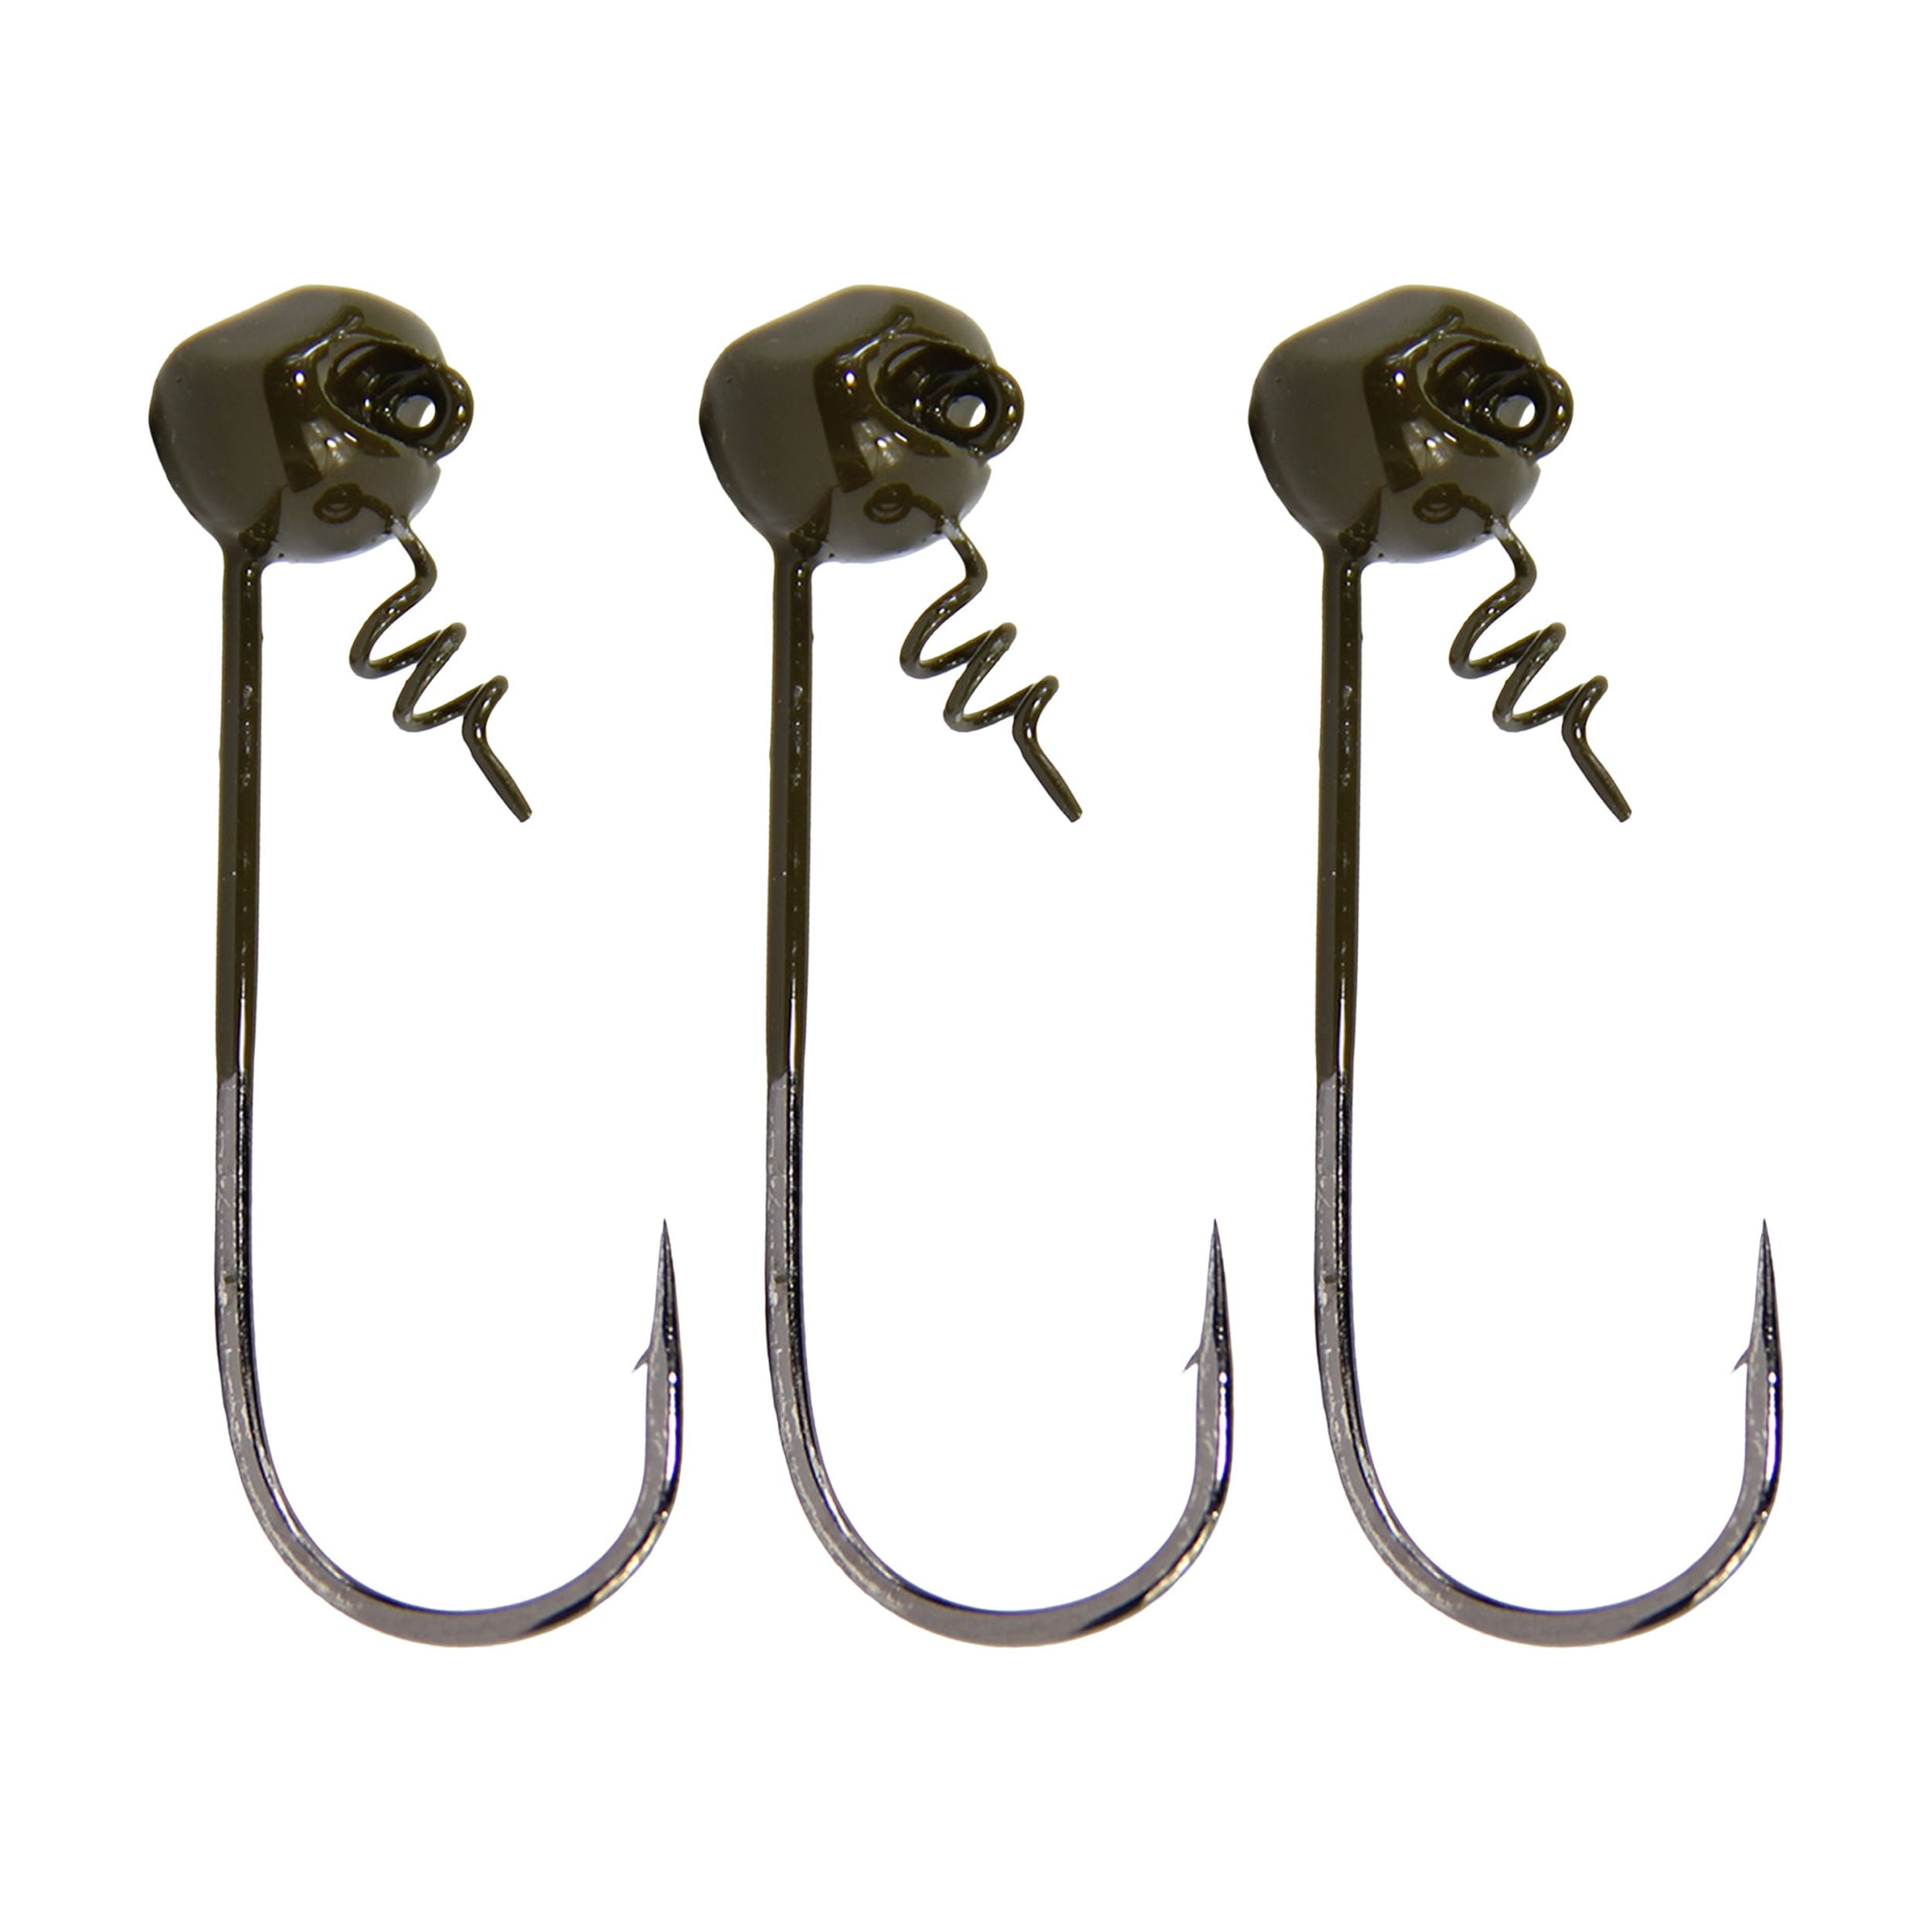 Tackle HD 3-Pack MF Shakey Head Jig Hooks, 1/4 Ounce Weighted Swimbait Jig  Heads with Fishing Hooks and Bait Keeper, Football Freshwater or Saltwater  Fishing Jigs, Green Pumpkin 